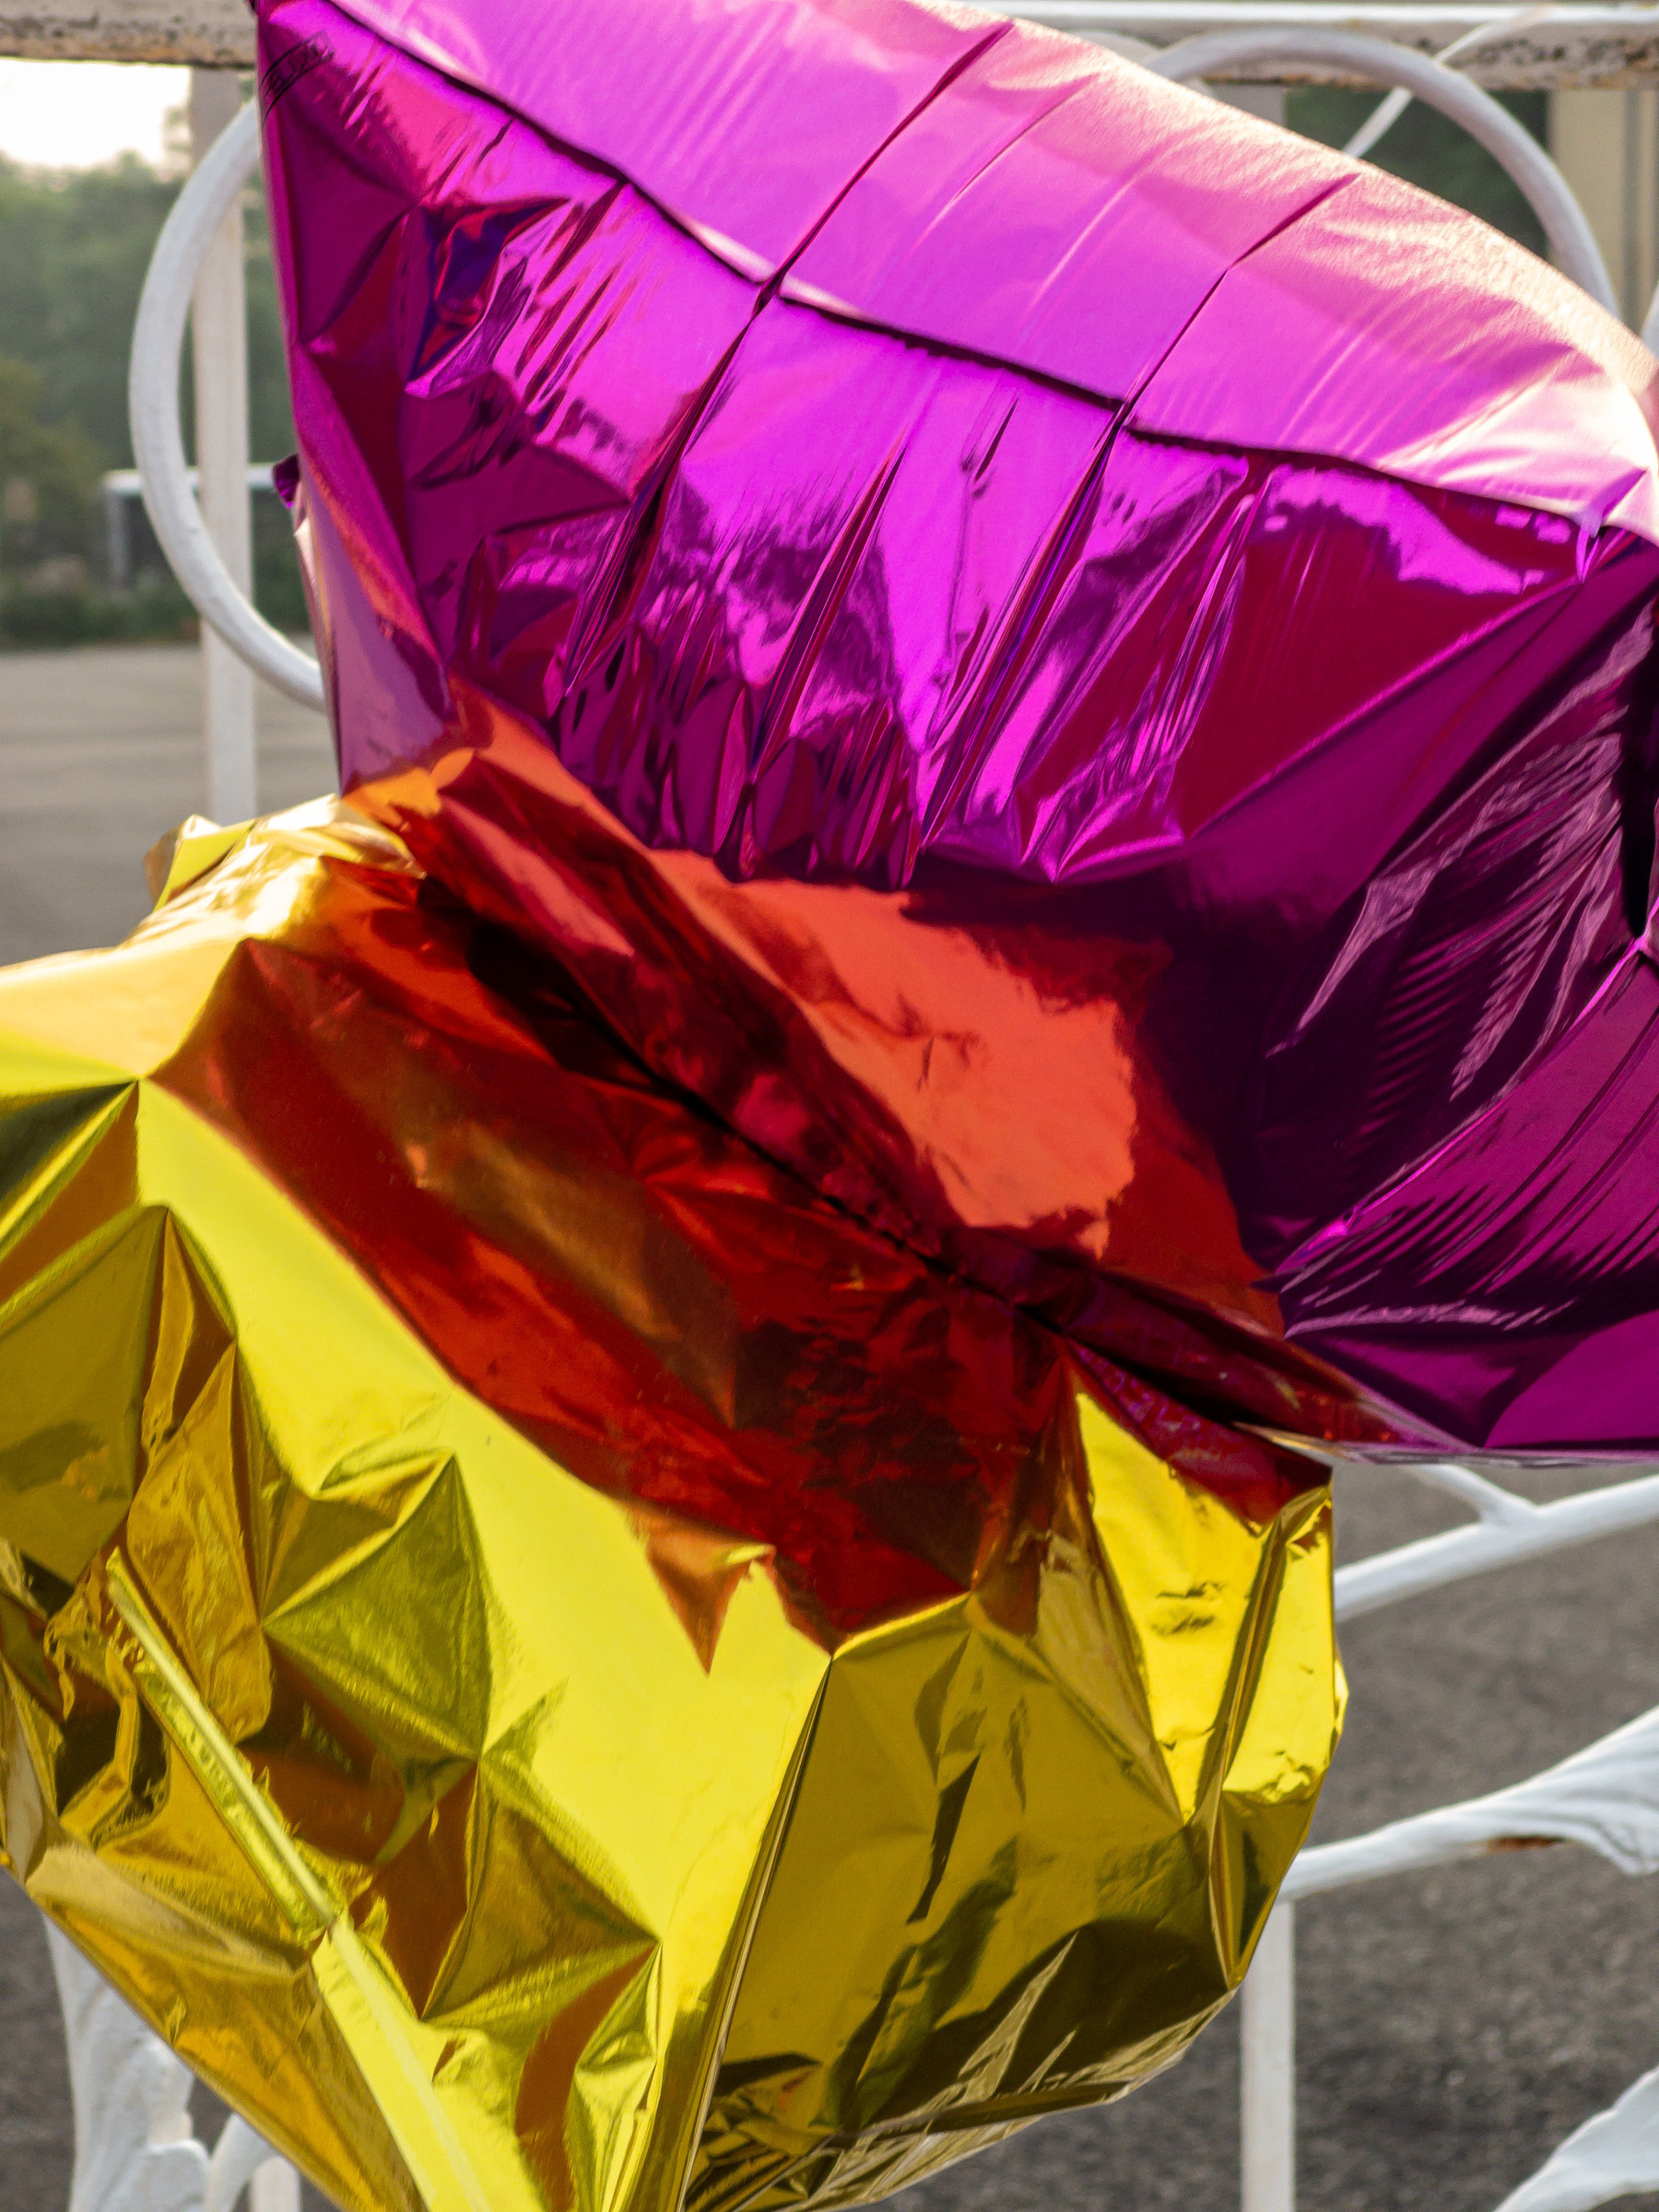 Partially deflated purple and yellow star shaped balloons reflecting off one another to produce an orange hue in the middle.